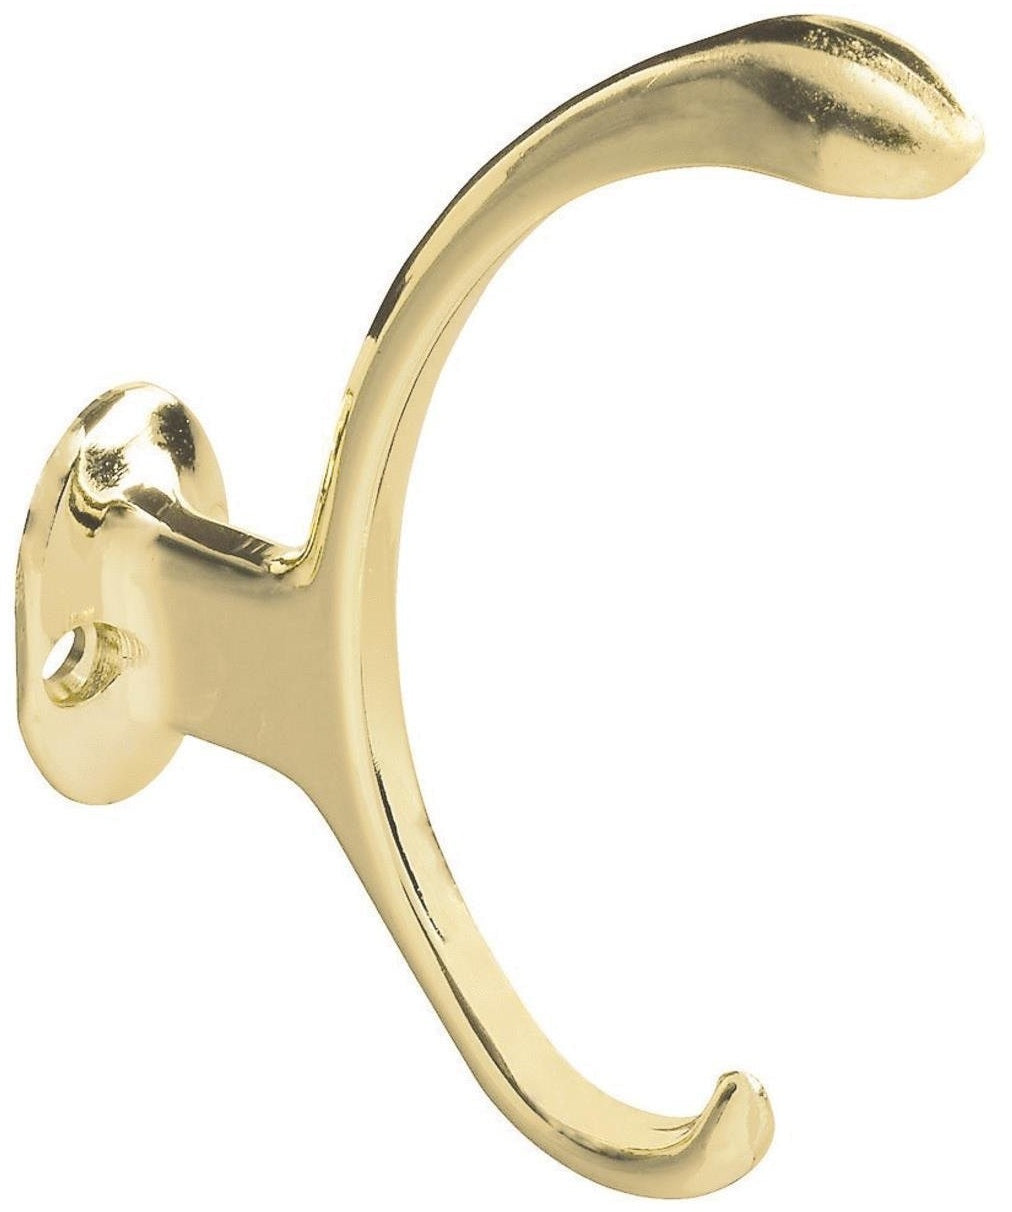 buy coat & hooks at cheap rate in bulk. wholesale & retail construction hardware tools store. home décor ideas, maintenance, repair replacement parts